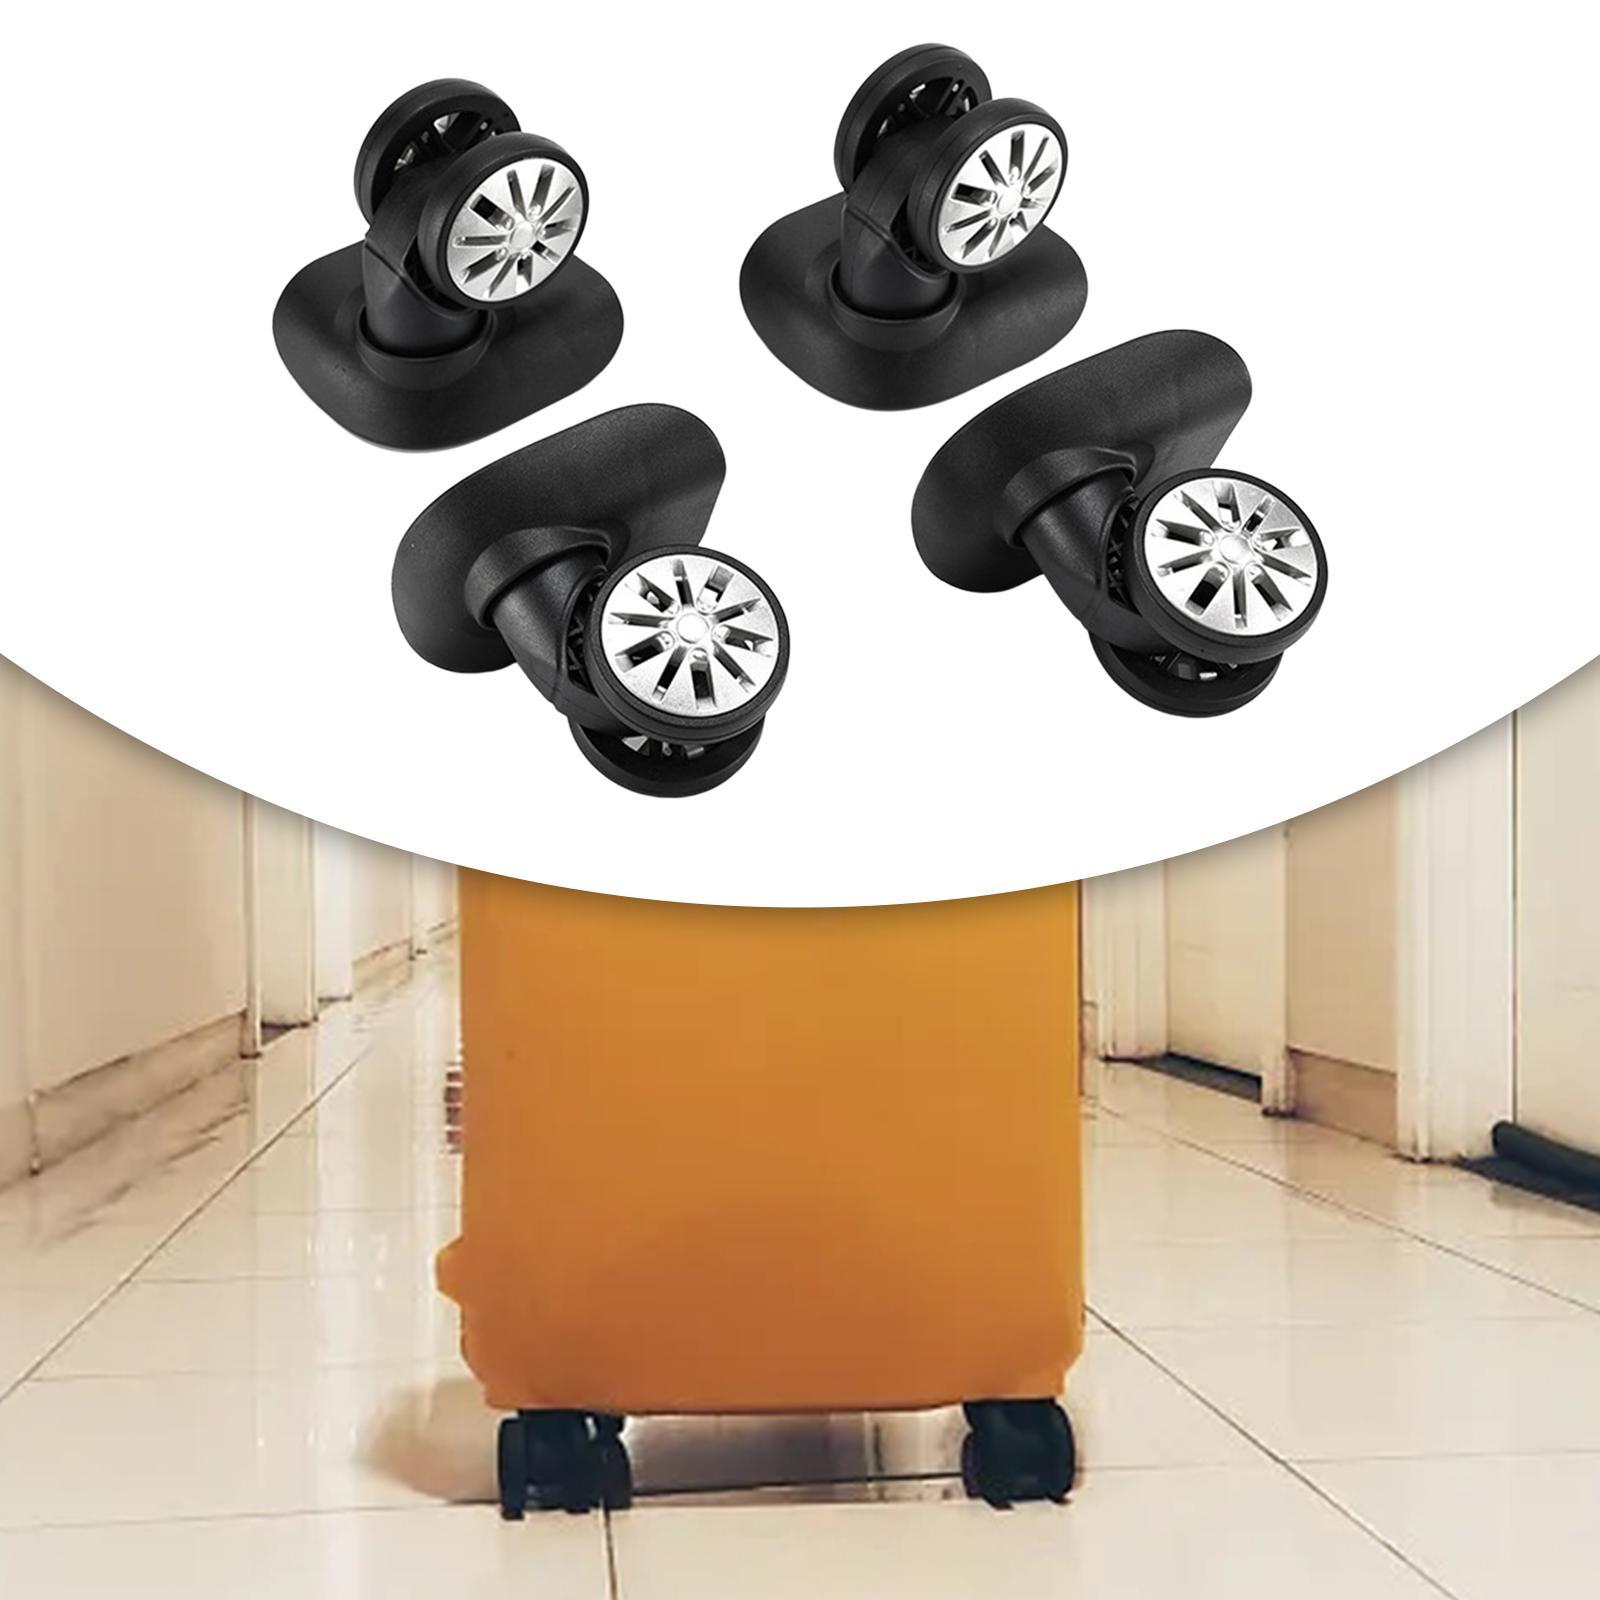 2x Replacement Luggage Wheels A19 Luggage Mute Wheel for